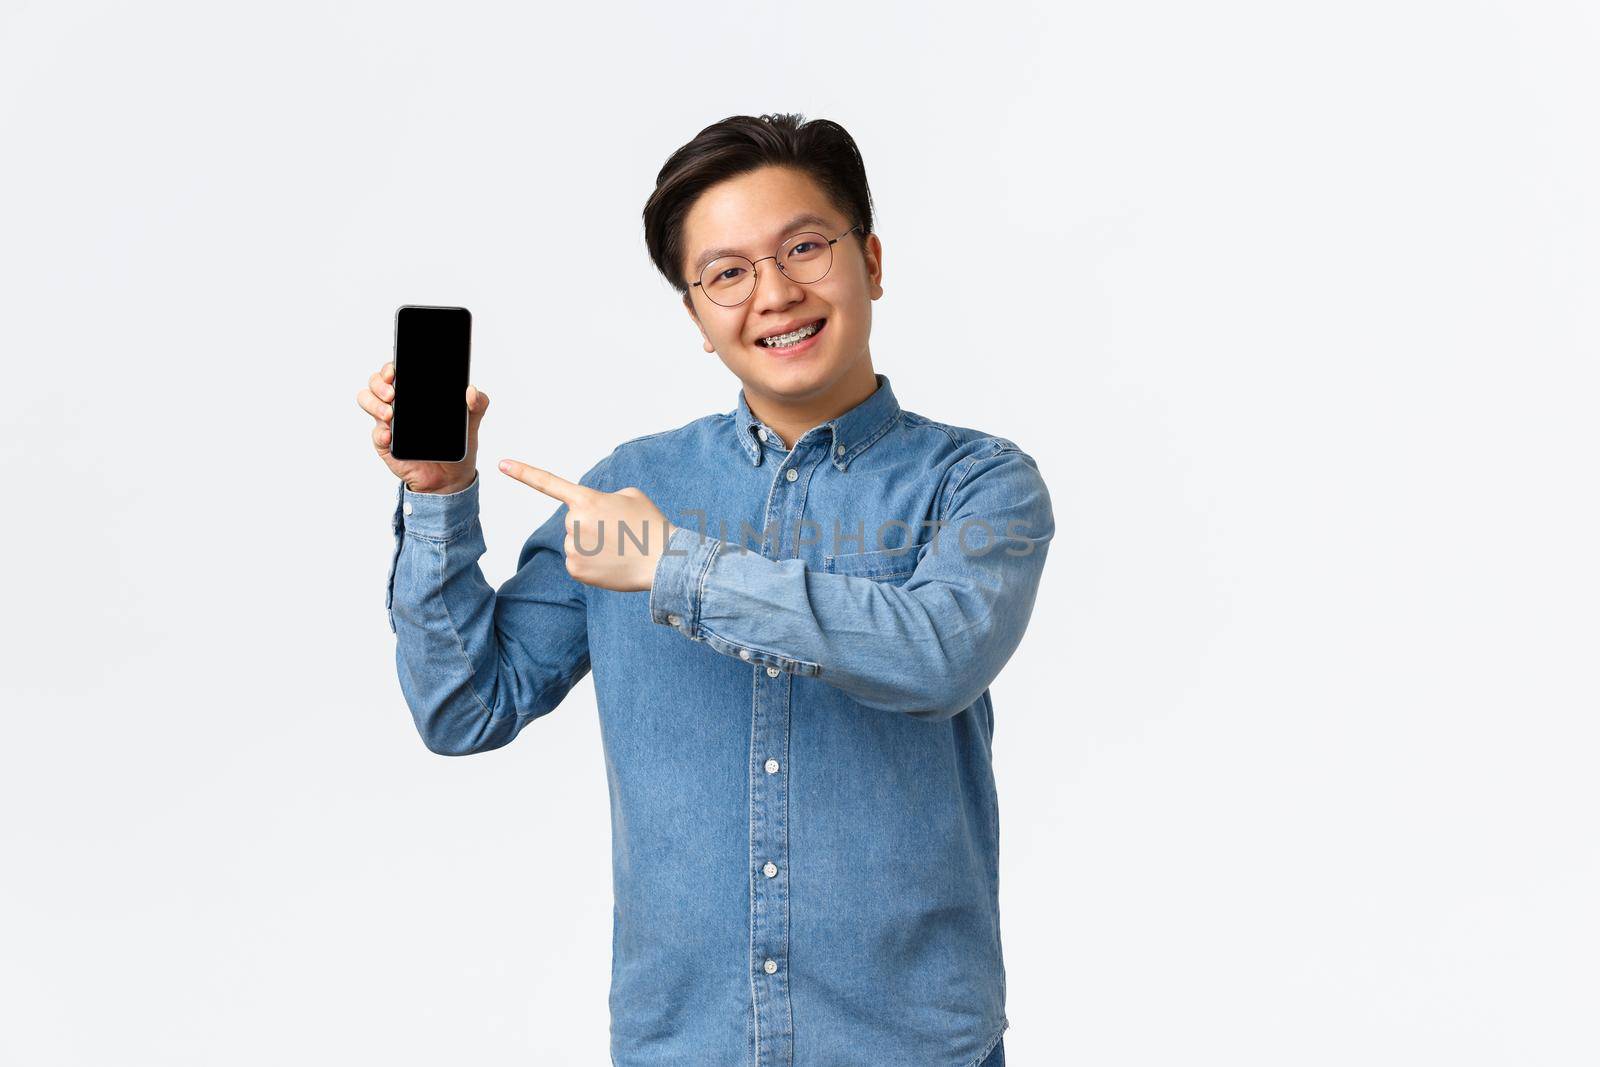 Smiling handsome asian guy with braces and glasses, pointing finger at smartphone screen. Man showing promo or application on mobile phone display, promote site, standing white background.